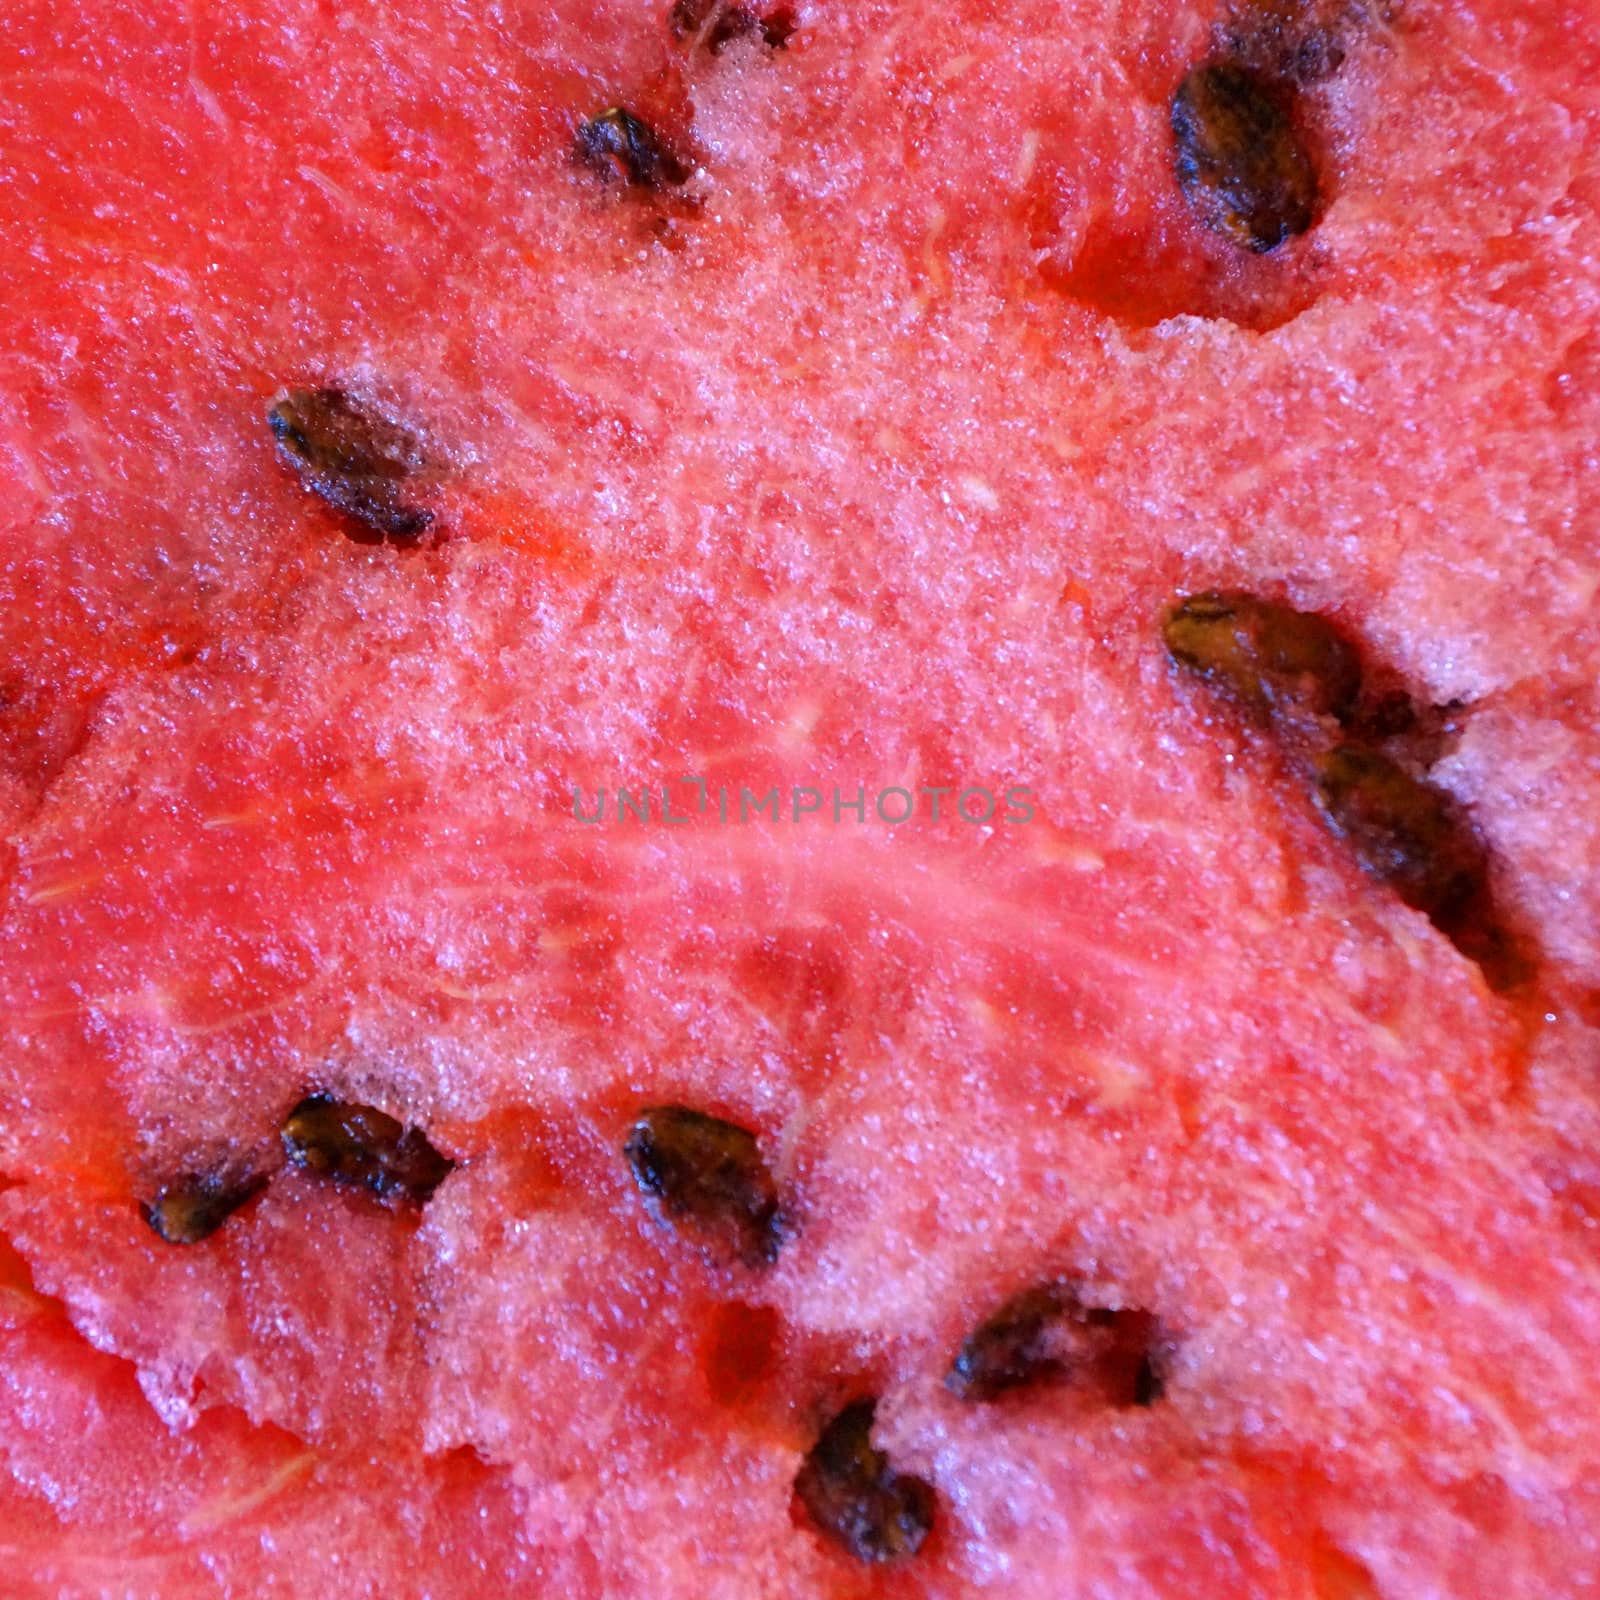 texture of red juicy watermelon for fruit background close up by Annado